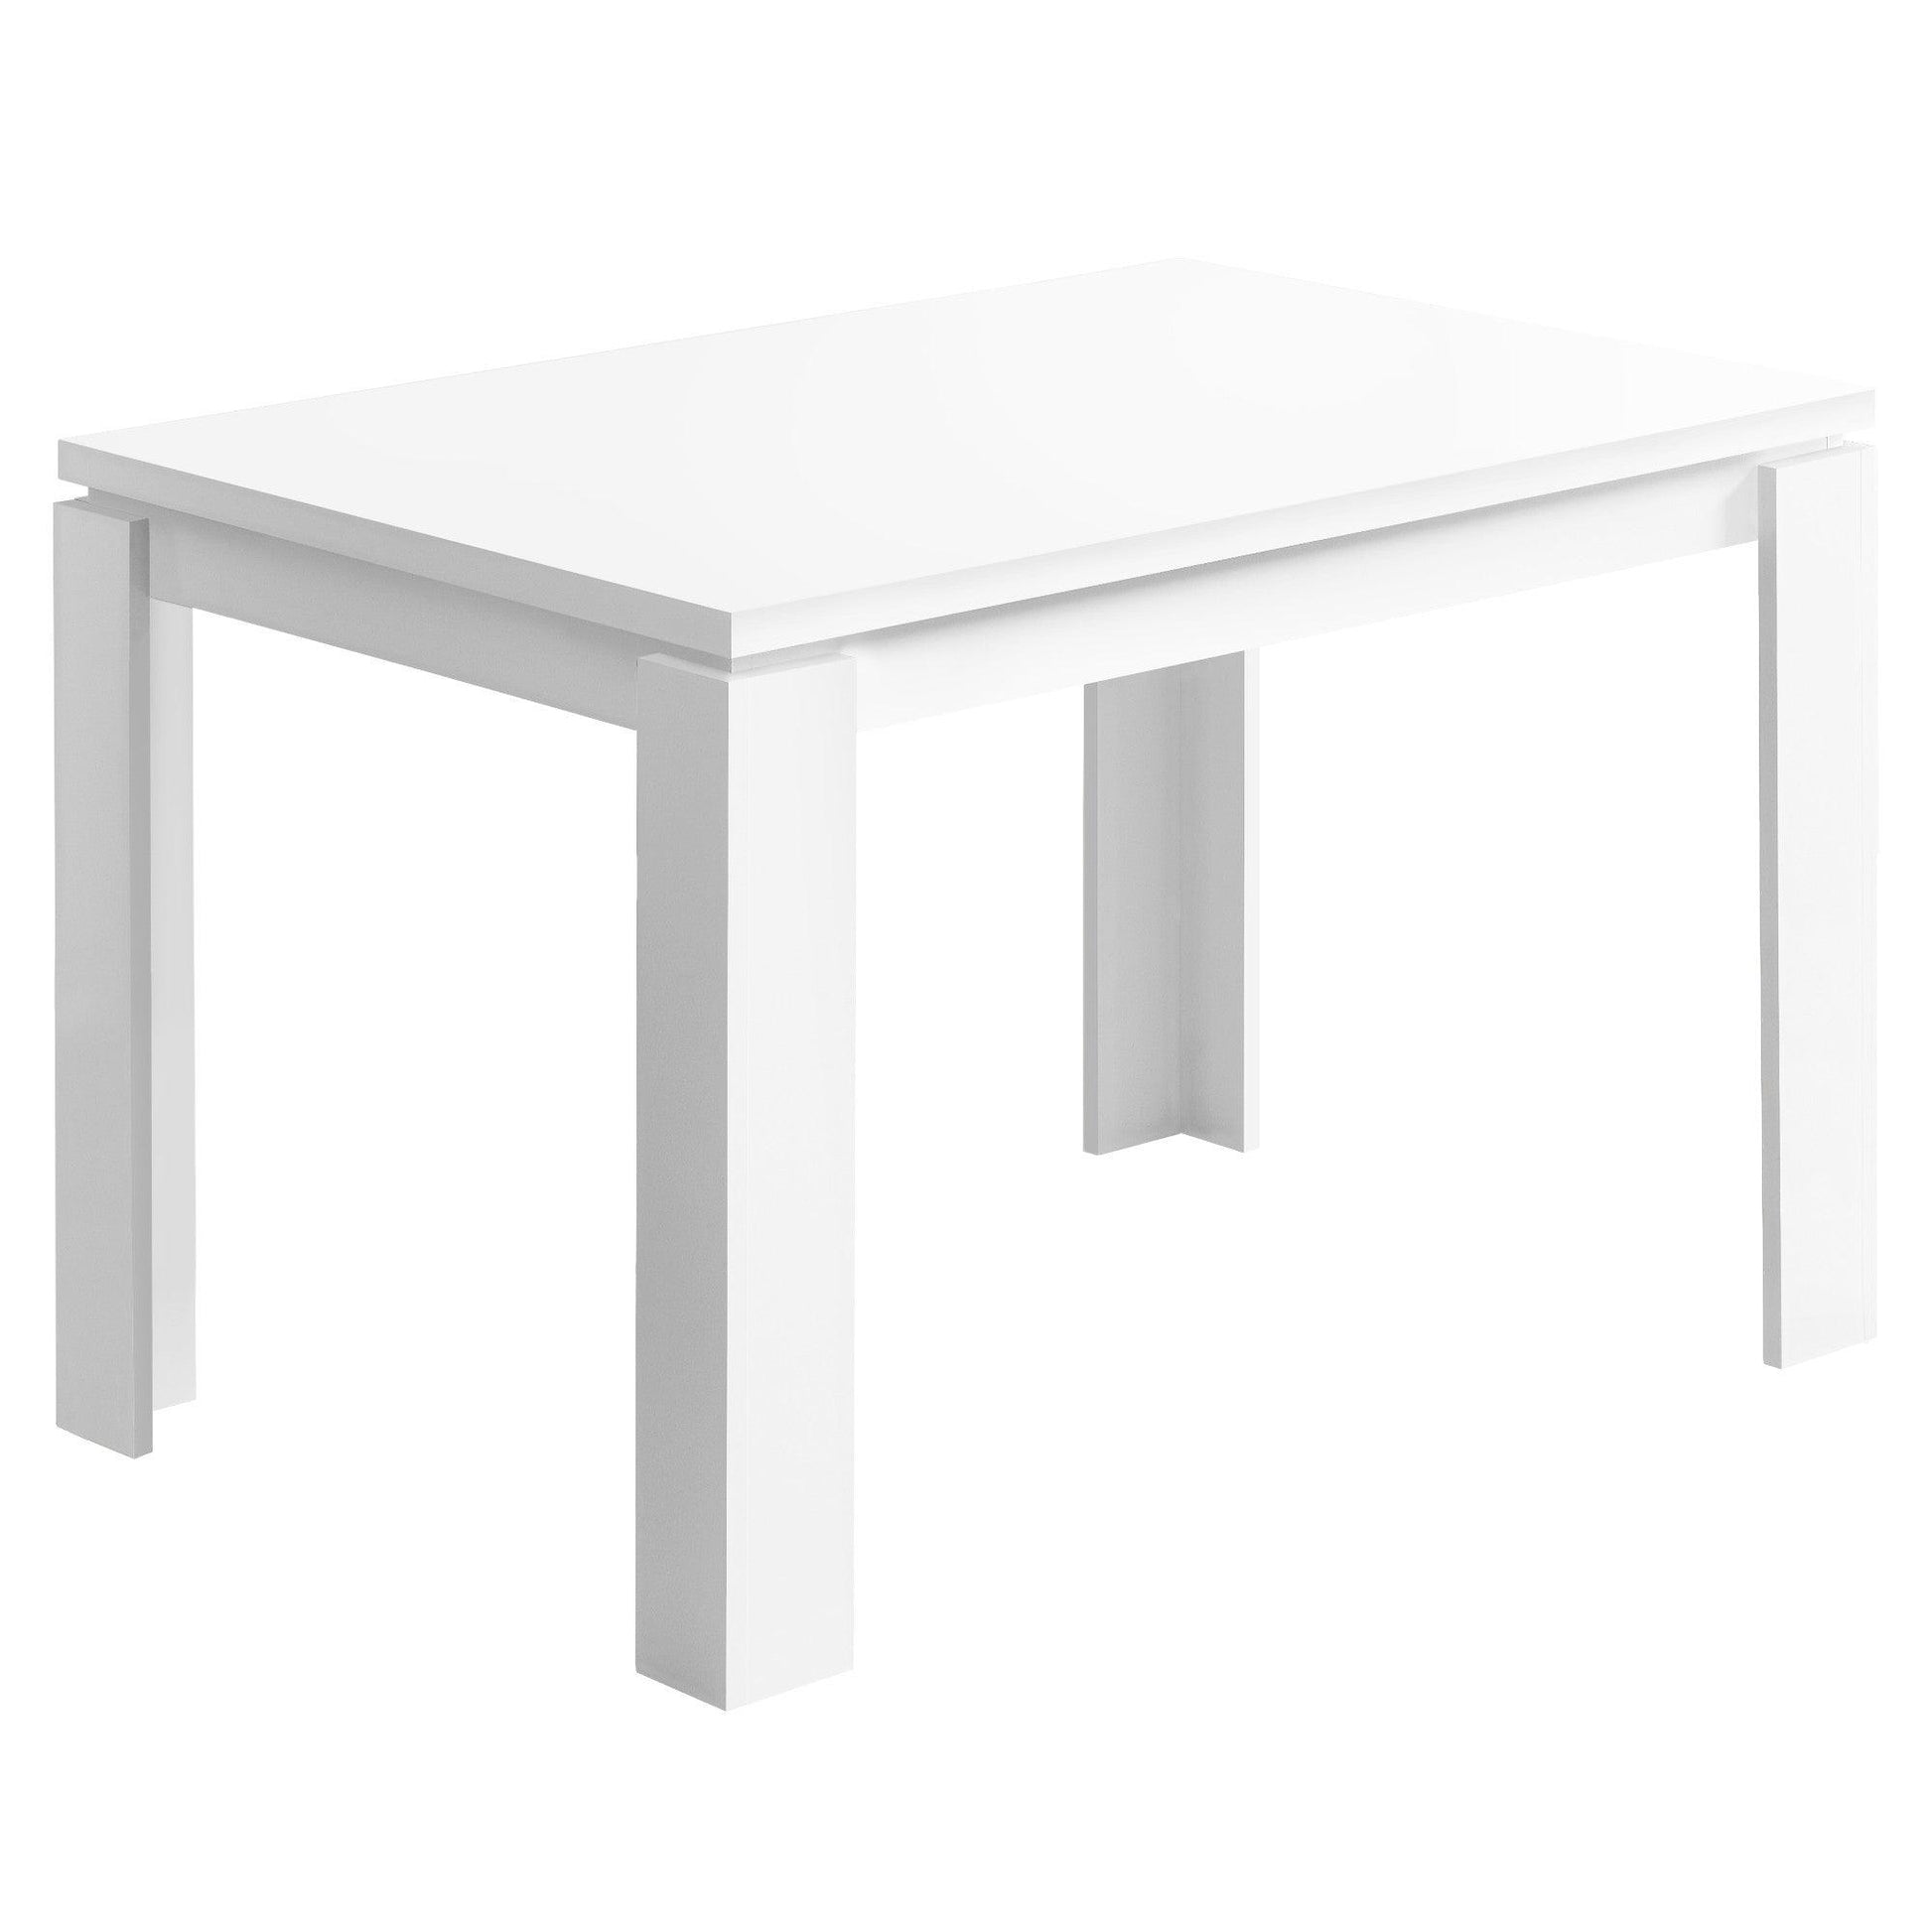 Classic White Dining Table - AFS